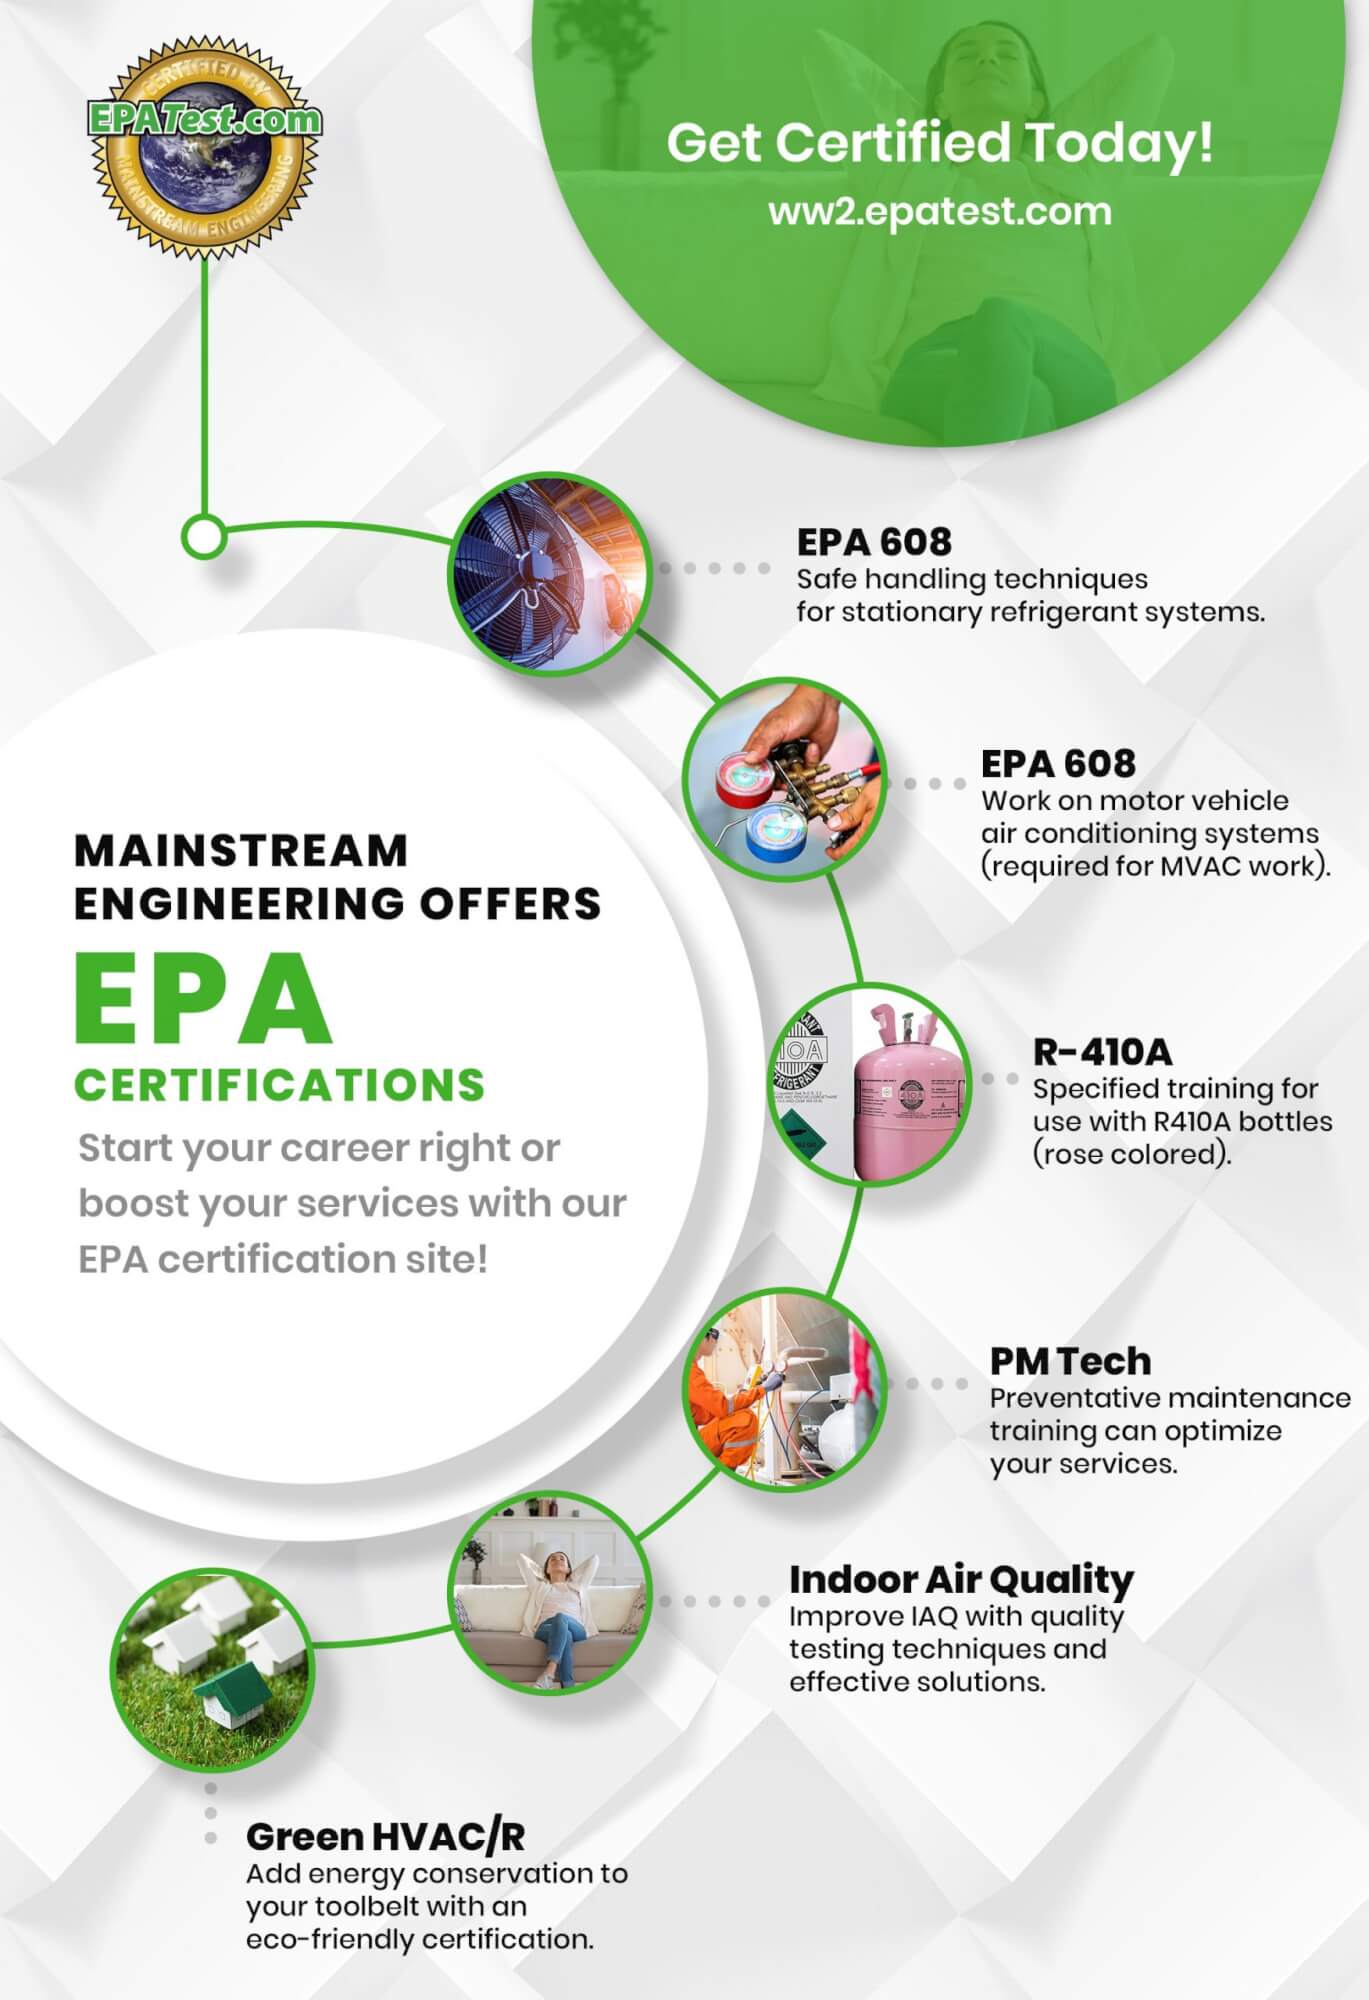 Achieve All of Your EPA Certifications With Mainstream Engineering